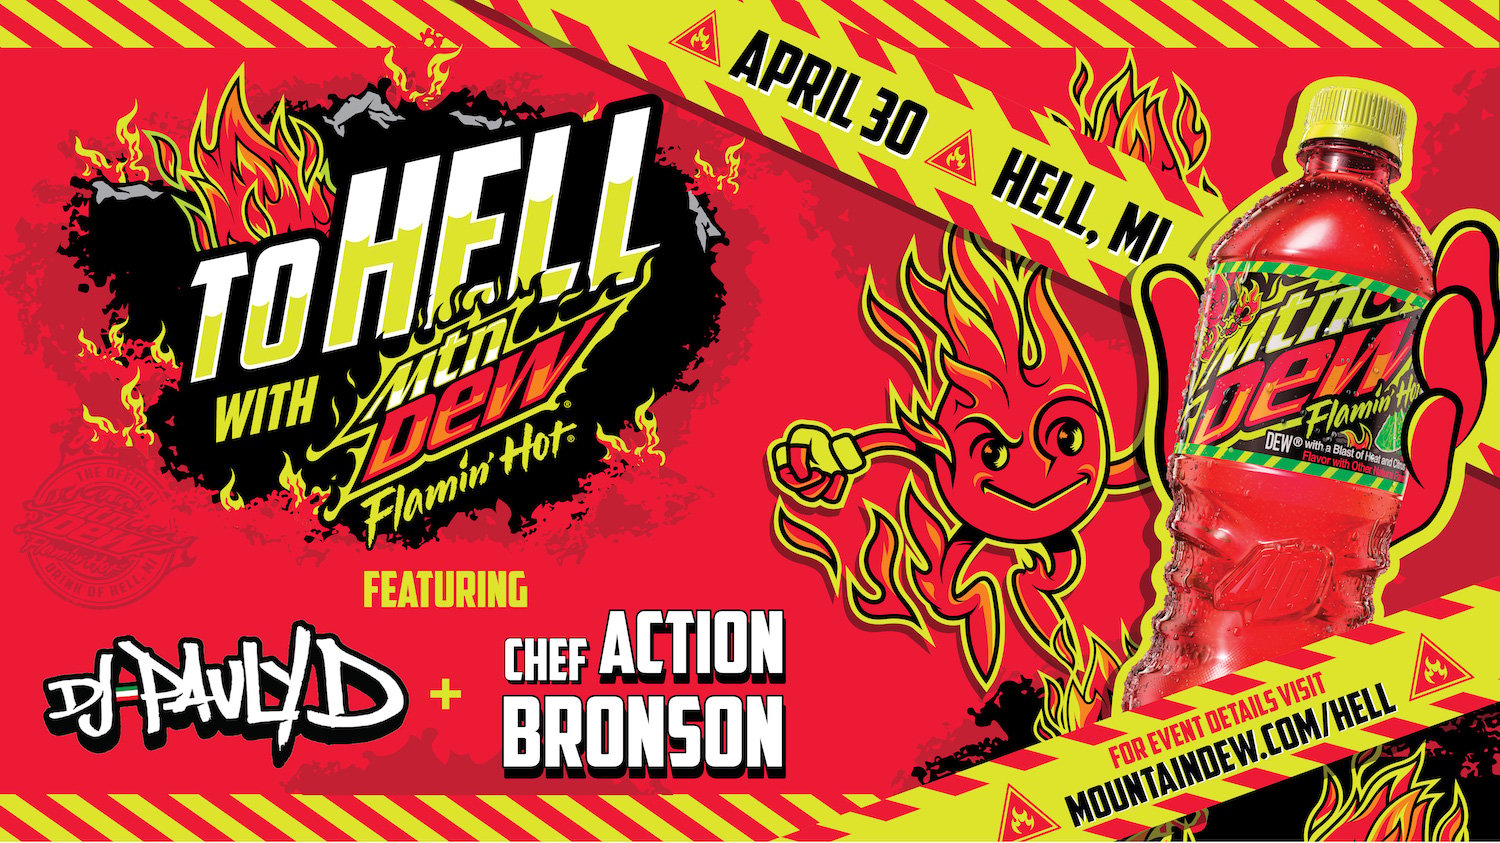 Promotional image for the DJ Pauly D and Action Bronson partnered with Mountain Dew Flamin' Hot event in Hell, Michigan